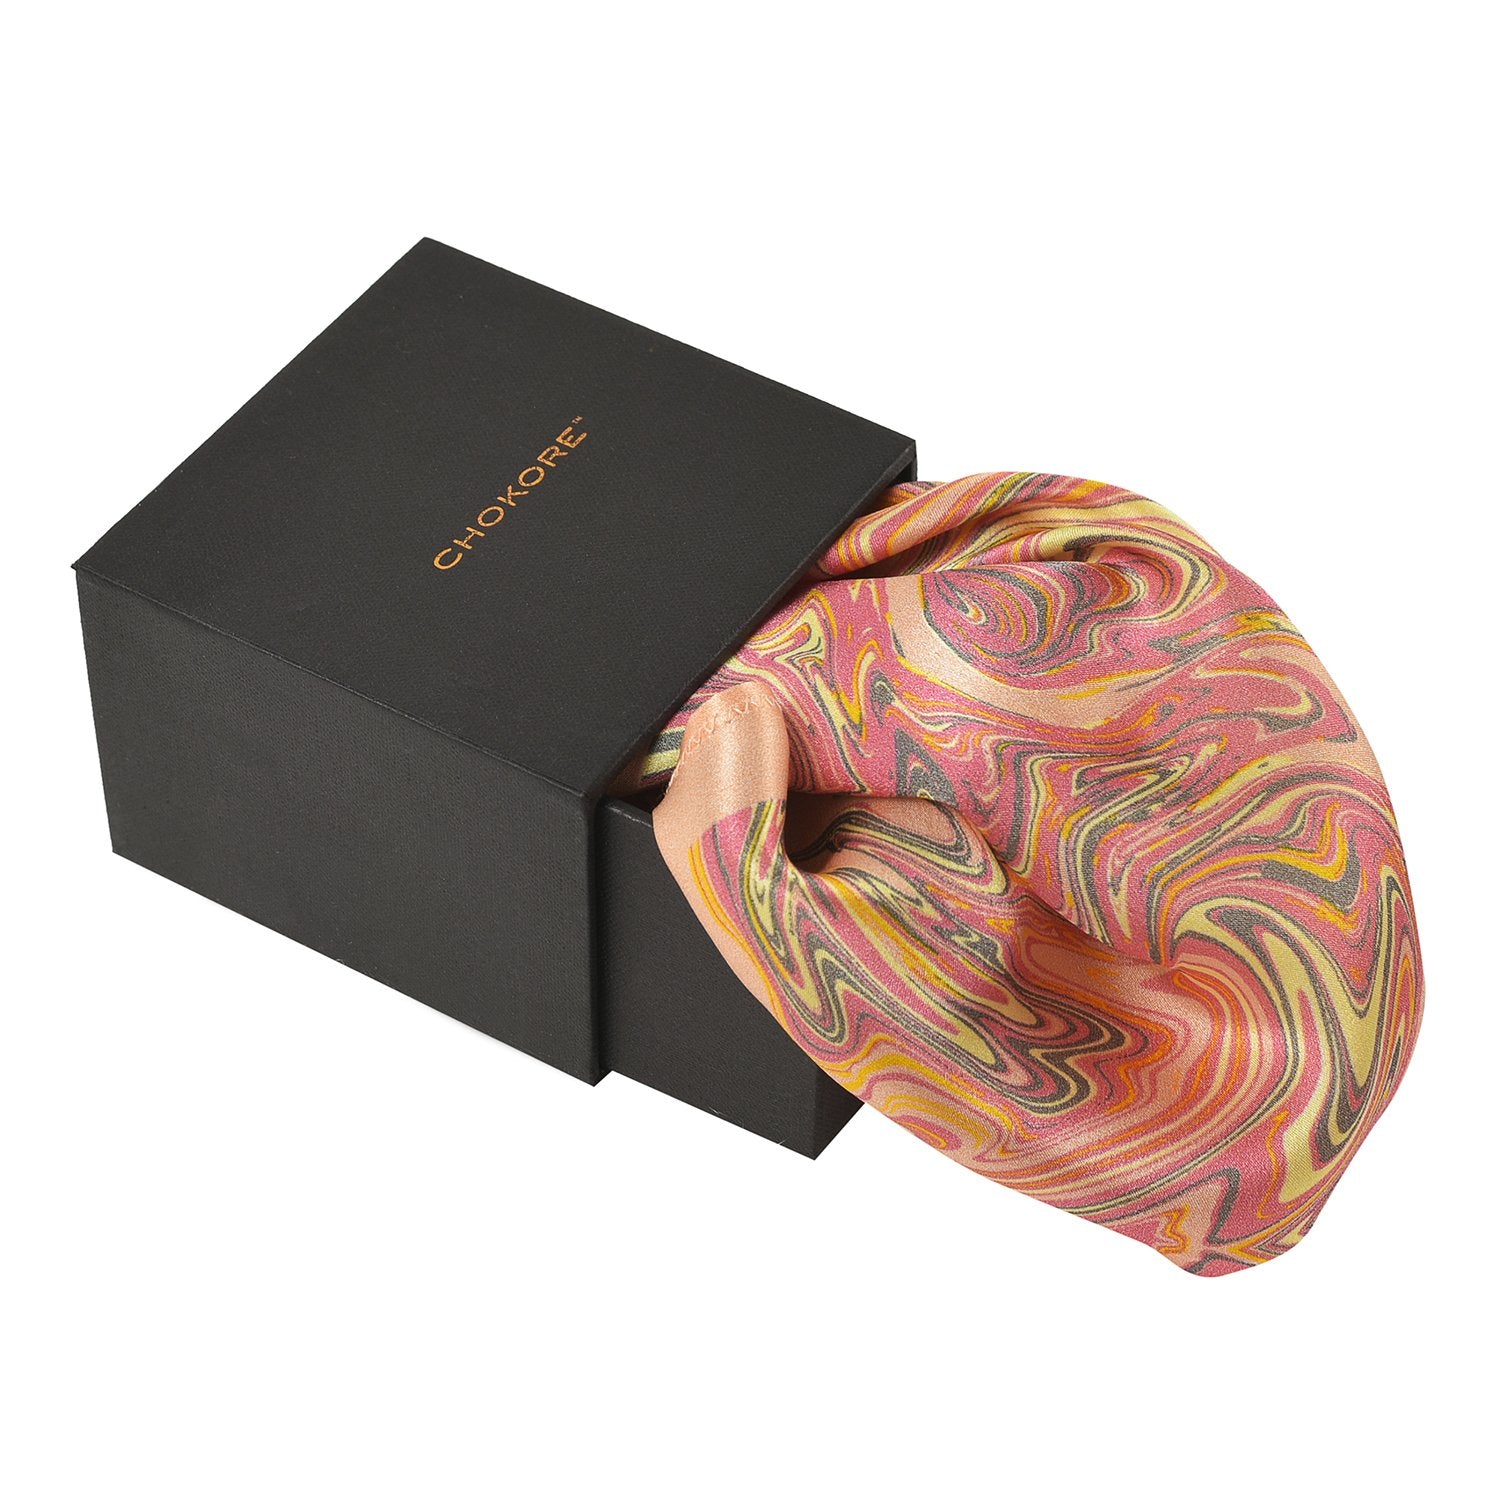 Chokore Rose Pink Silk Pocket Square from the Marble Design range